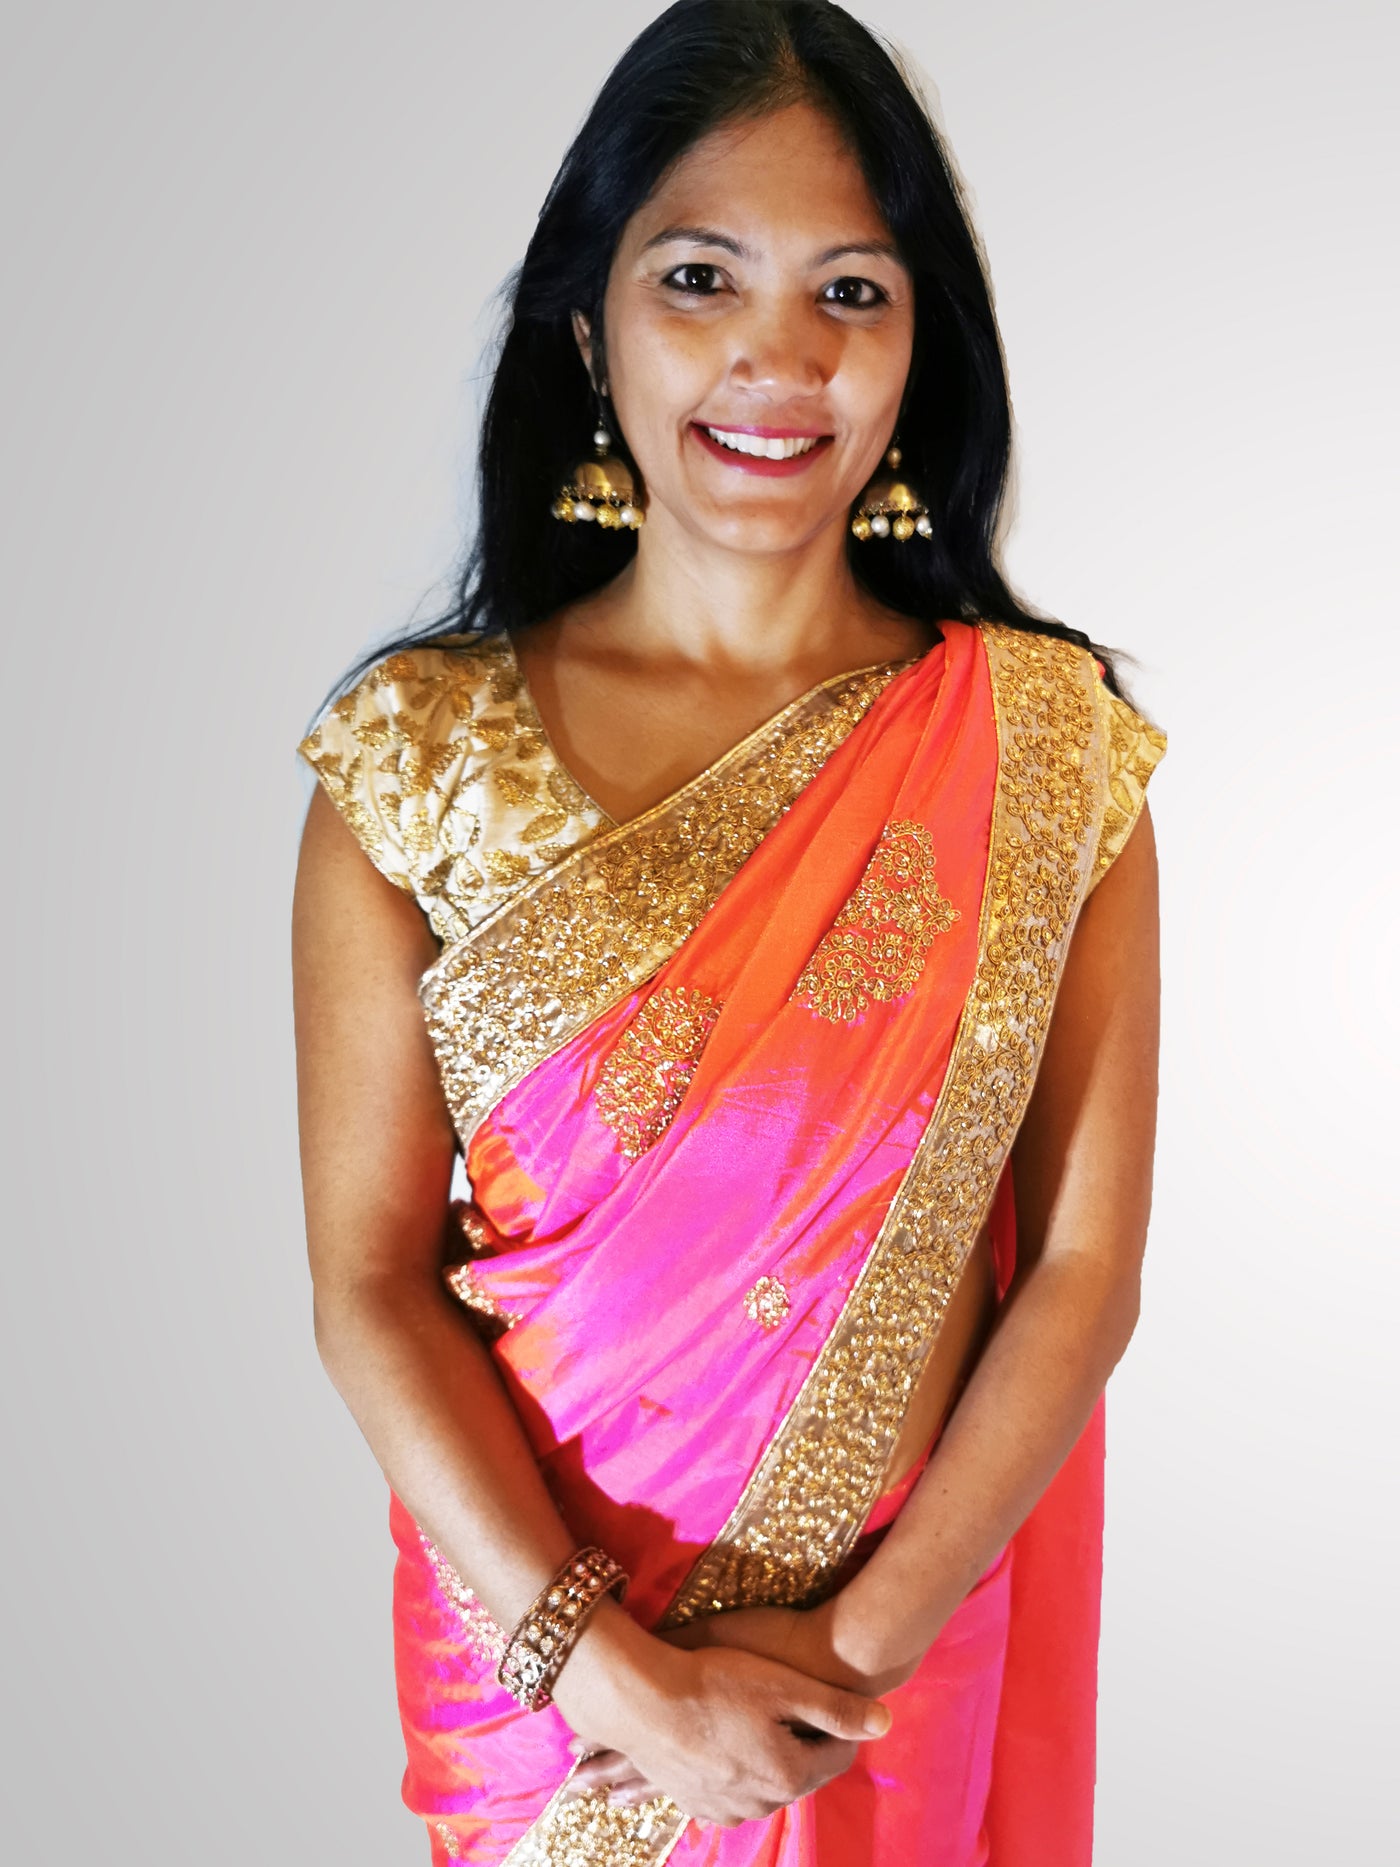 Shimmering Pink Silk Saree - Indian Clothing in Denver, CO, Aurora, CO, Boulder, CO, Fort Collins, CO, Colorado Springs, CO, Parker, CO, Highlands Ranch, CO, Cherry Creek, CO, Centennial, CO, and Longmont, CO. Nationwide shipping USA - India Fashion X